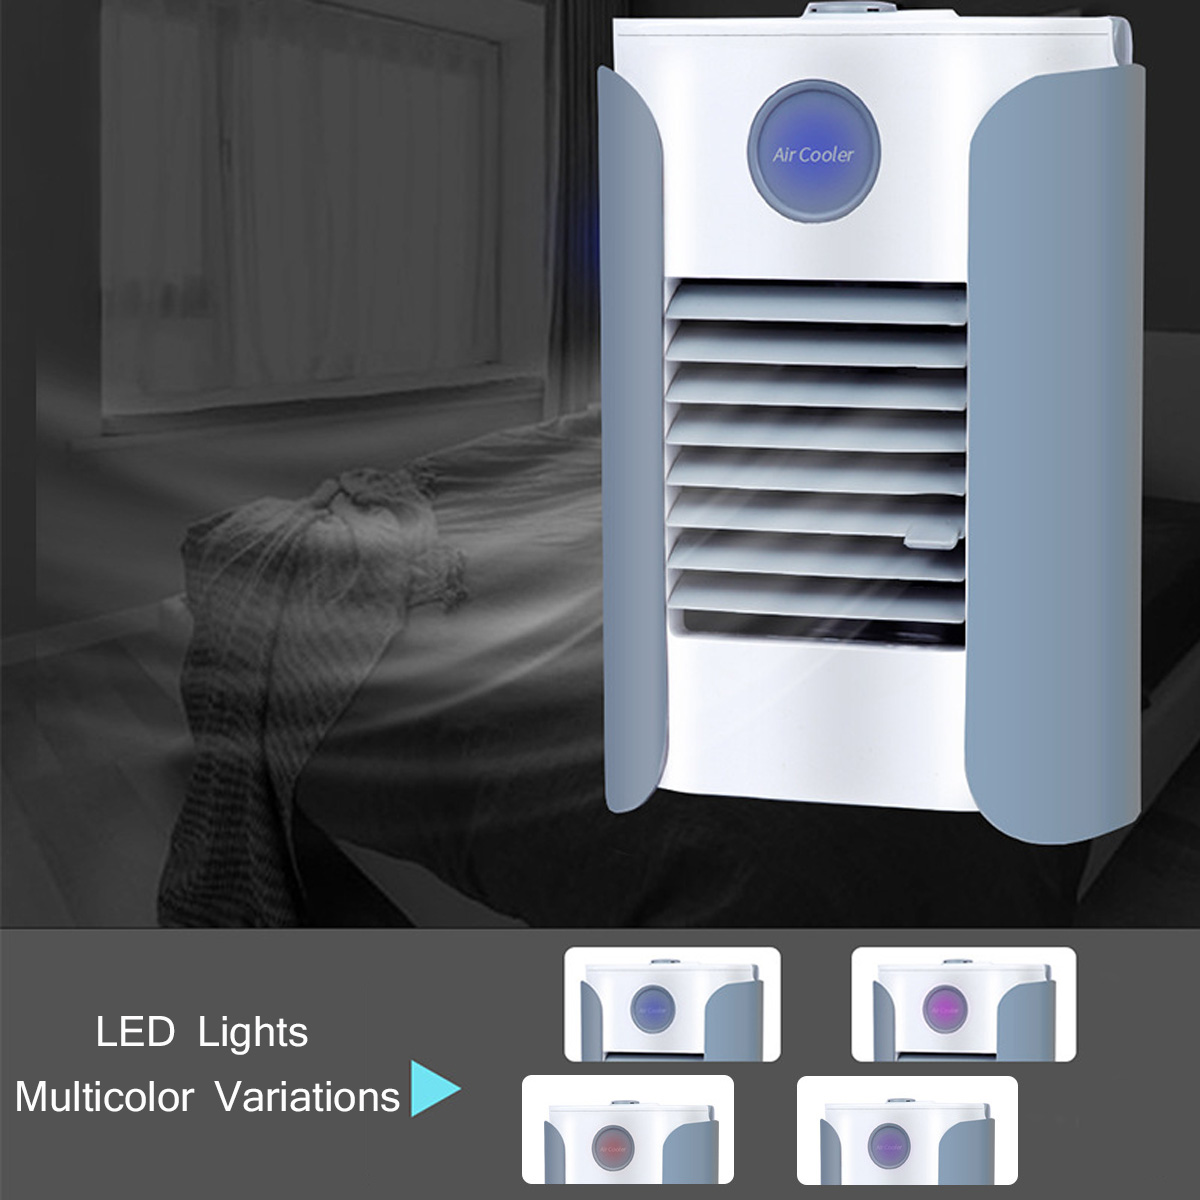 USB-Multifunction-Humidifier-Portable-Air-Conditioner-Fan-Cooling-bluetooth-Speaker-Gifts-for-Family-1675300-9